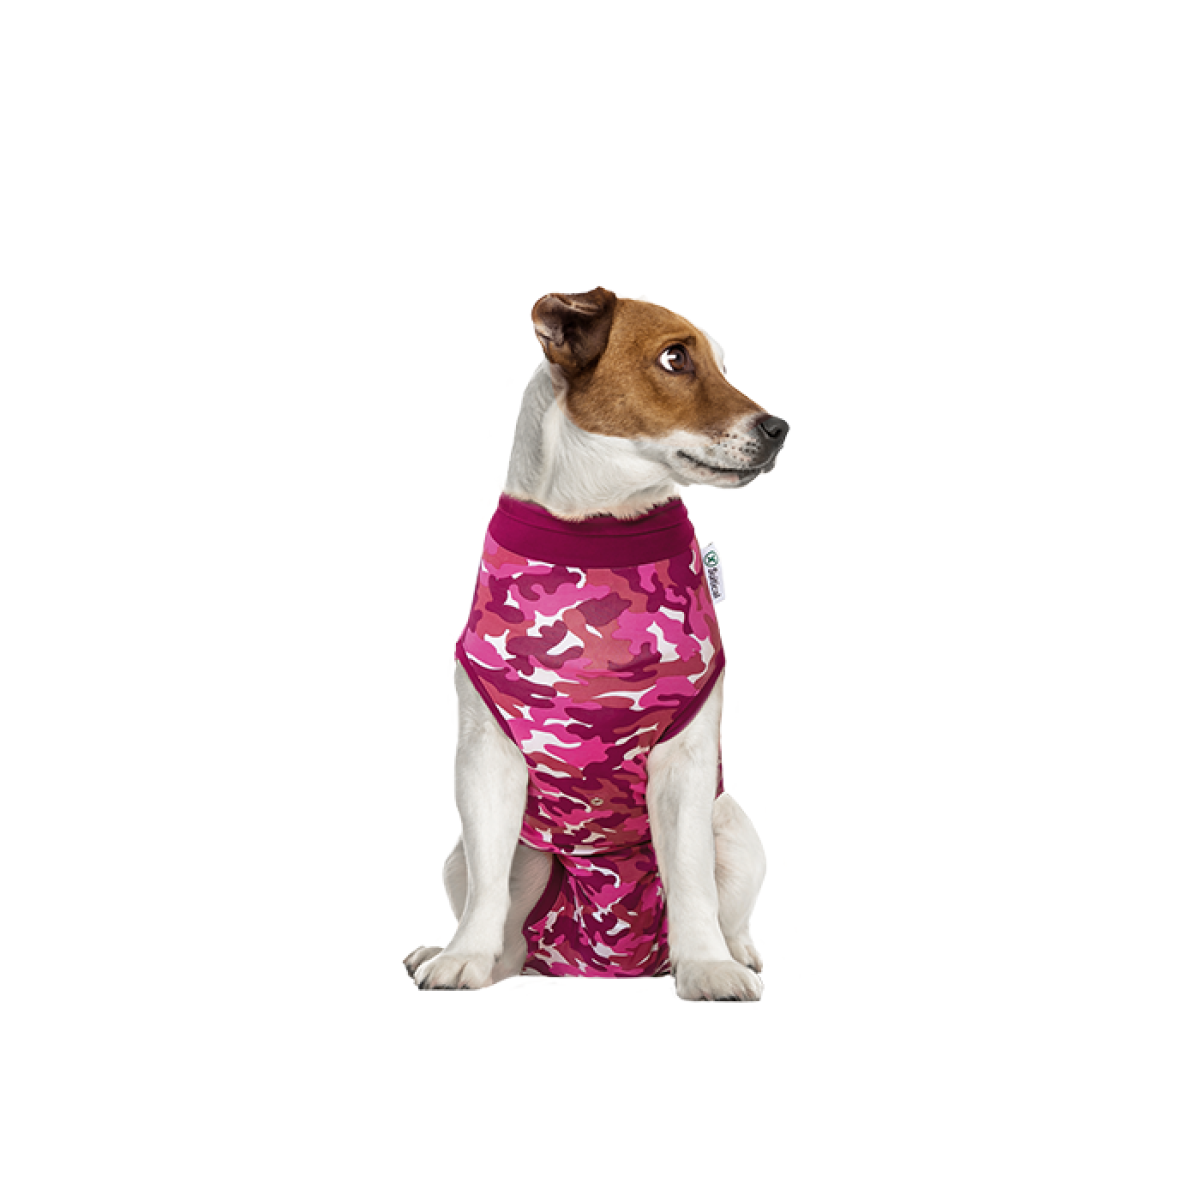 Dog Recovery Suit Female,Pink XX-Large Surgery Recovery Shirt,Pink-White  Striped XXL